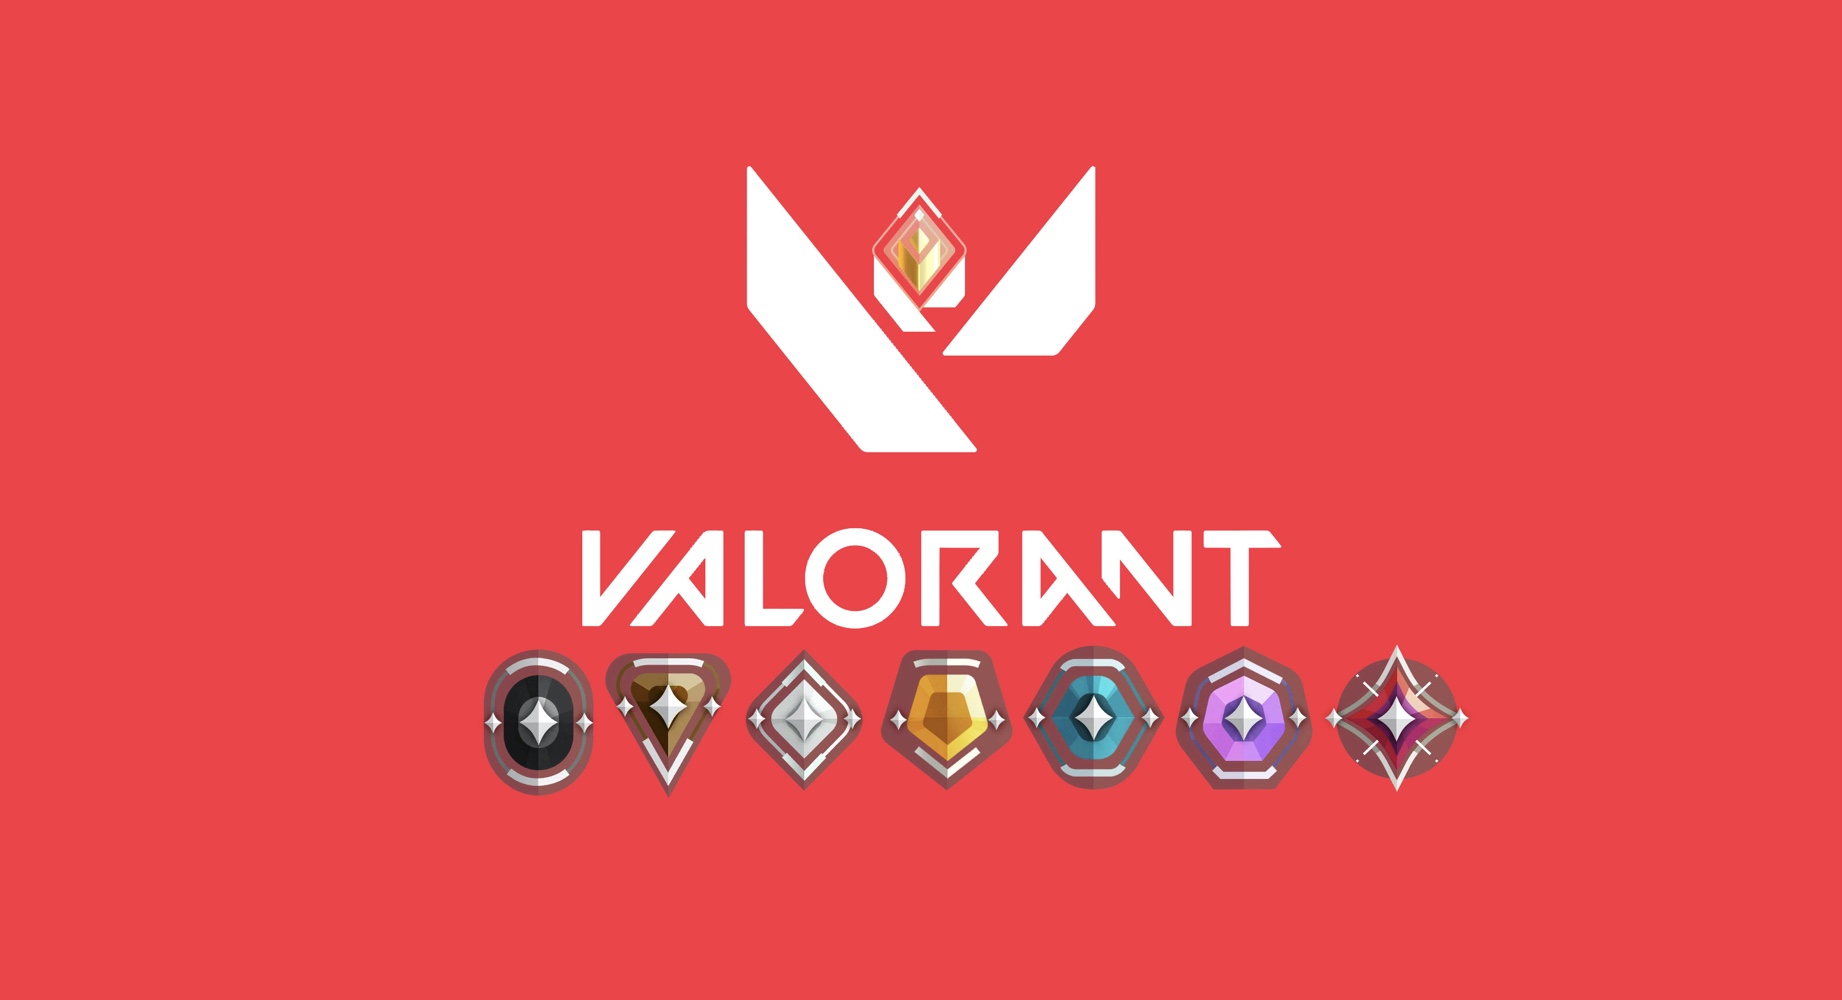 Valorant Gains New Social Sign-in Options